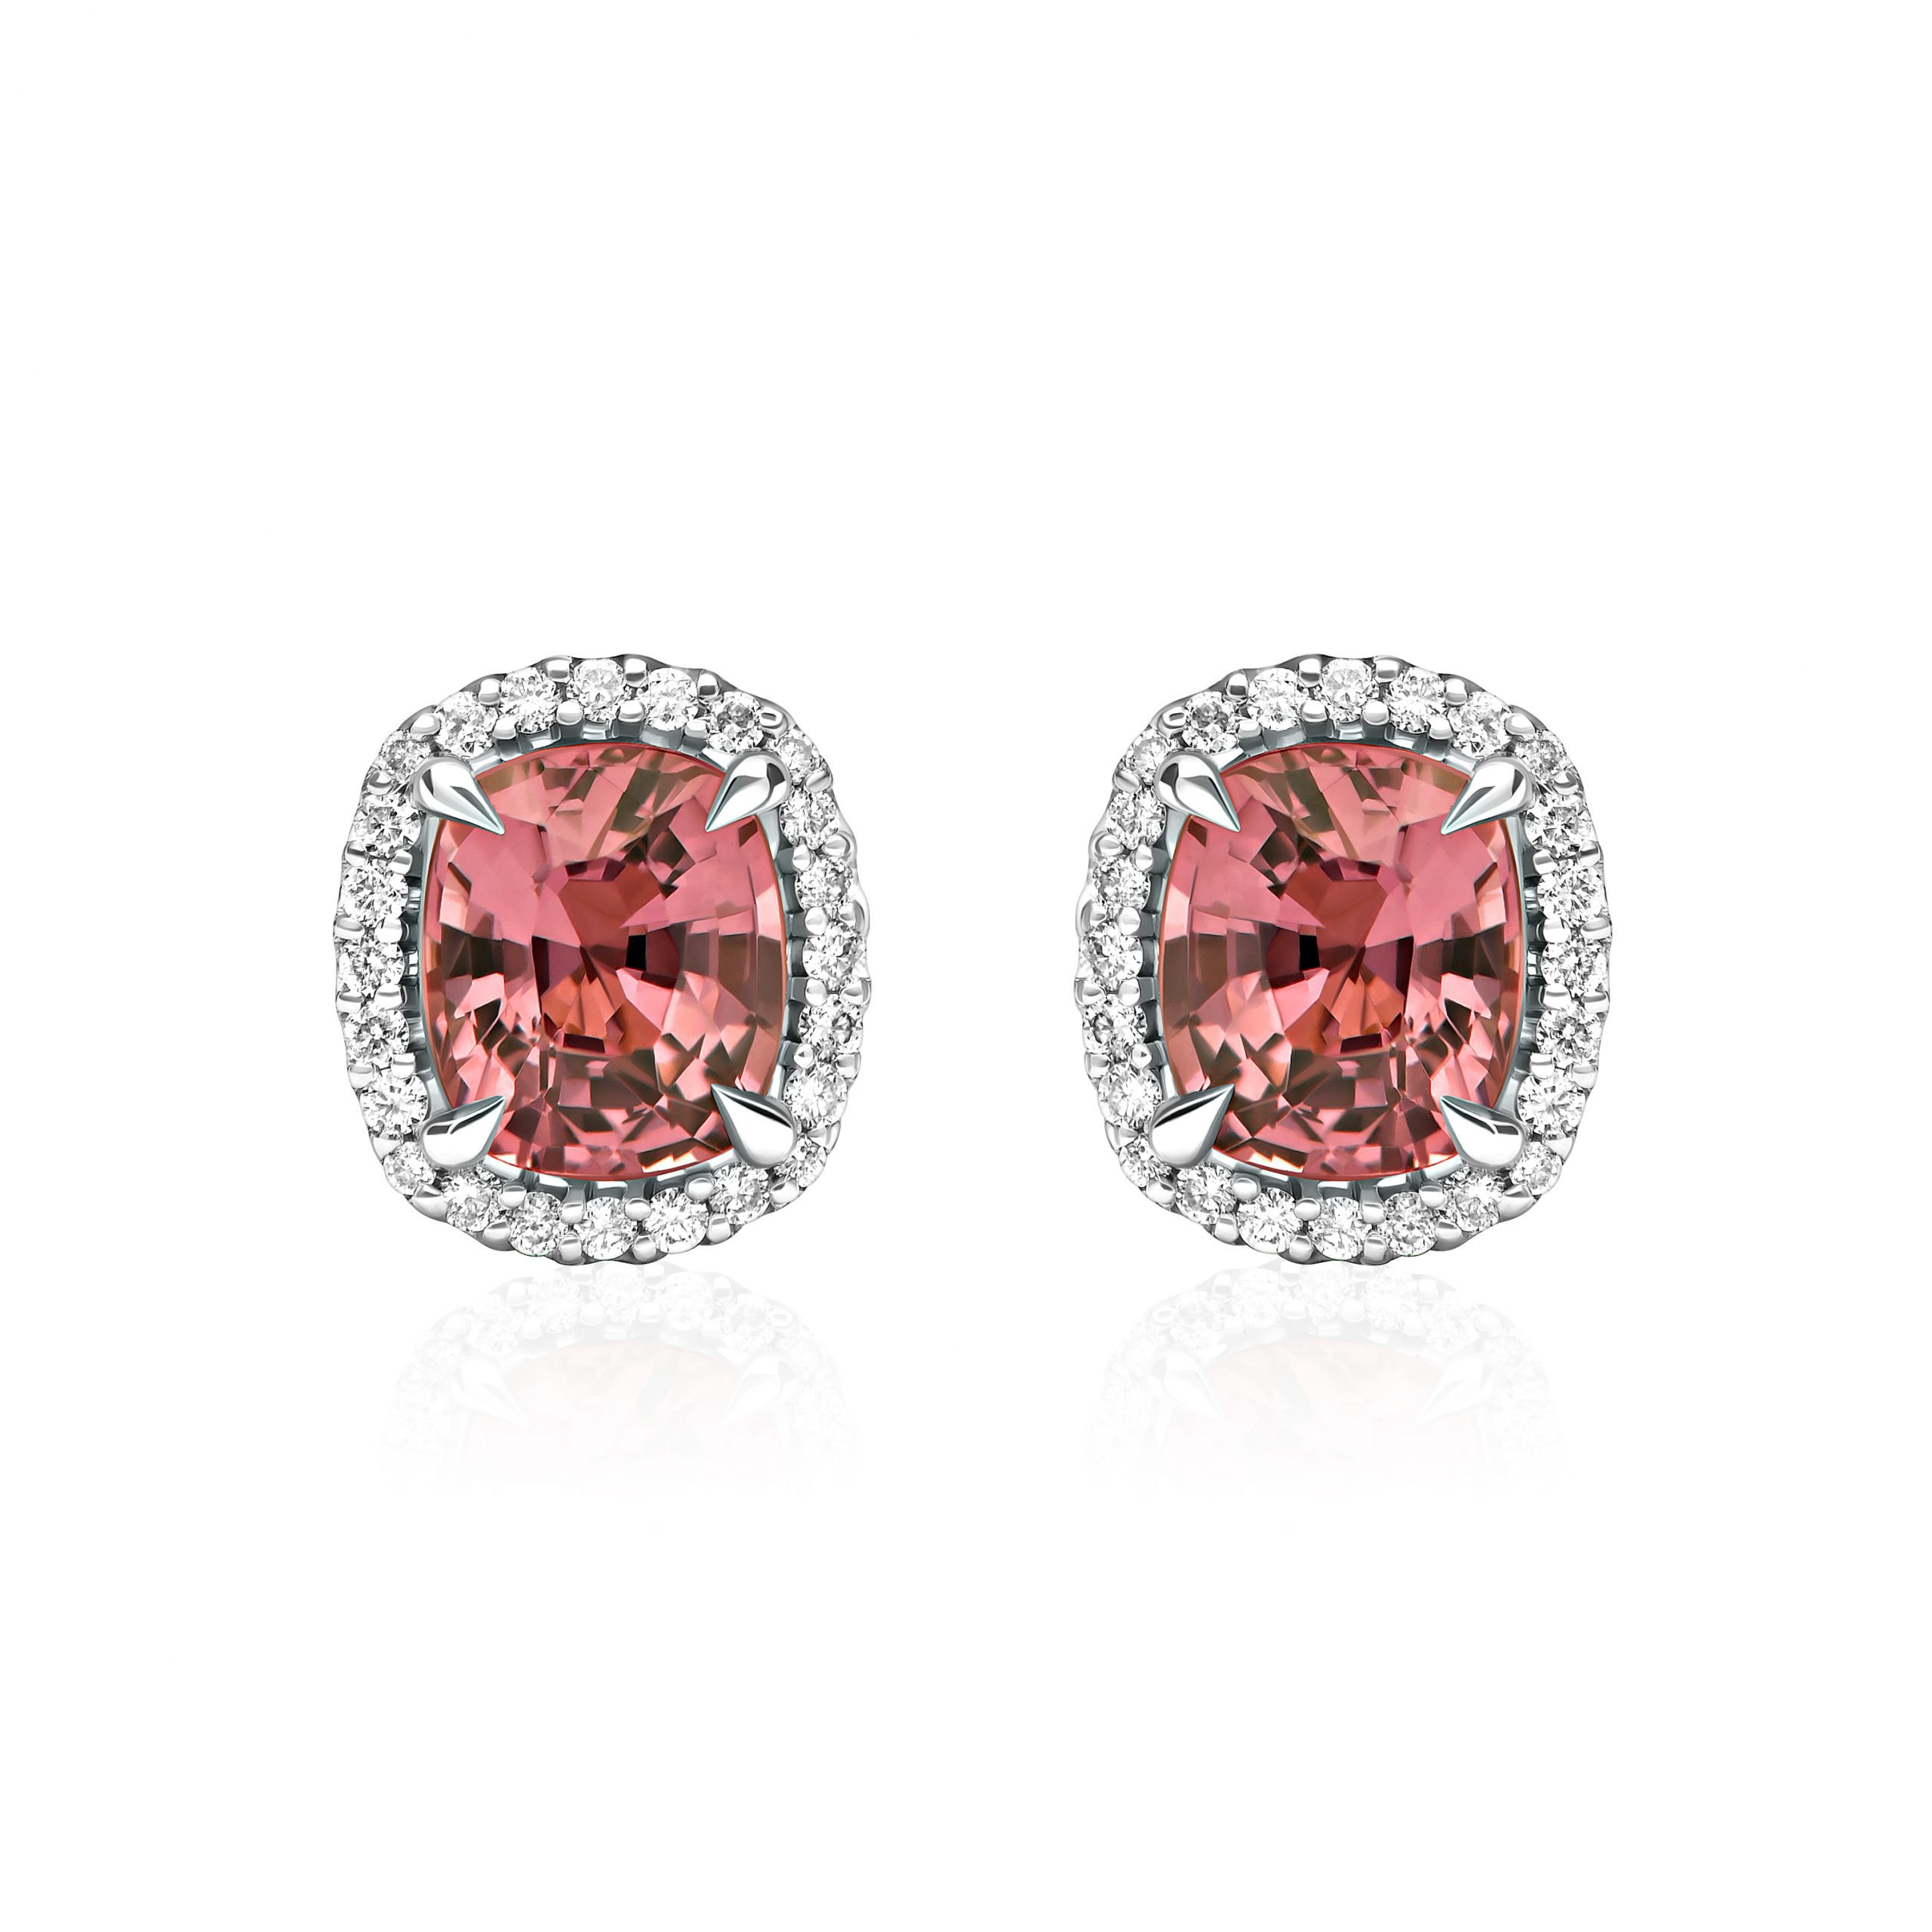 Spinel stud earrings with a total weight of 2.16 ct #1